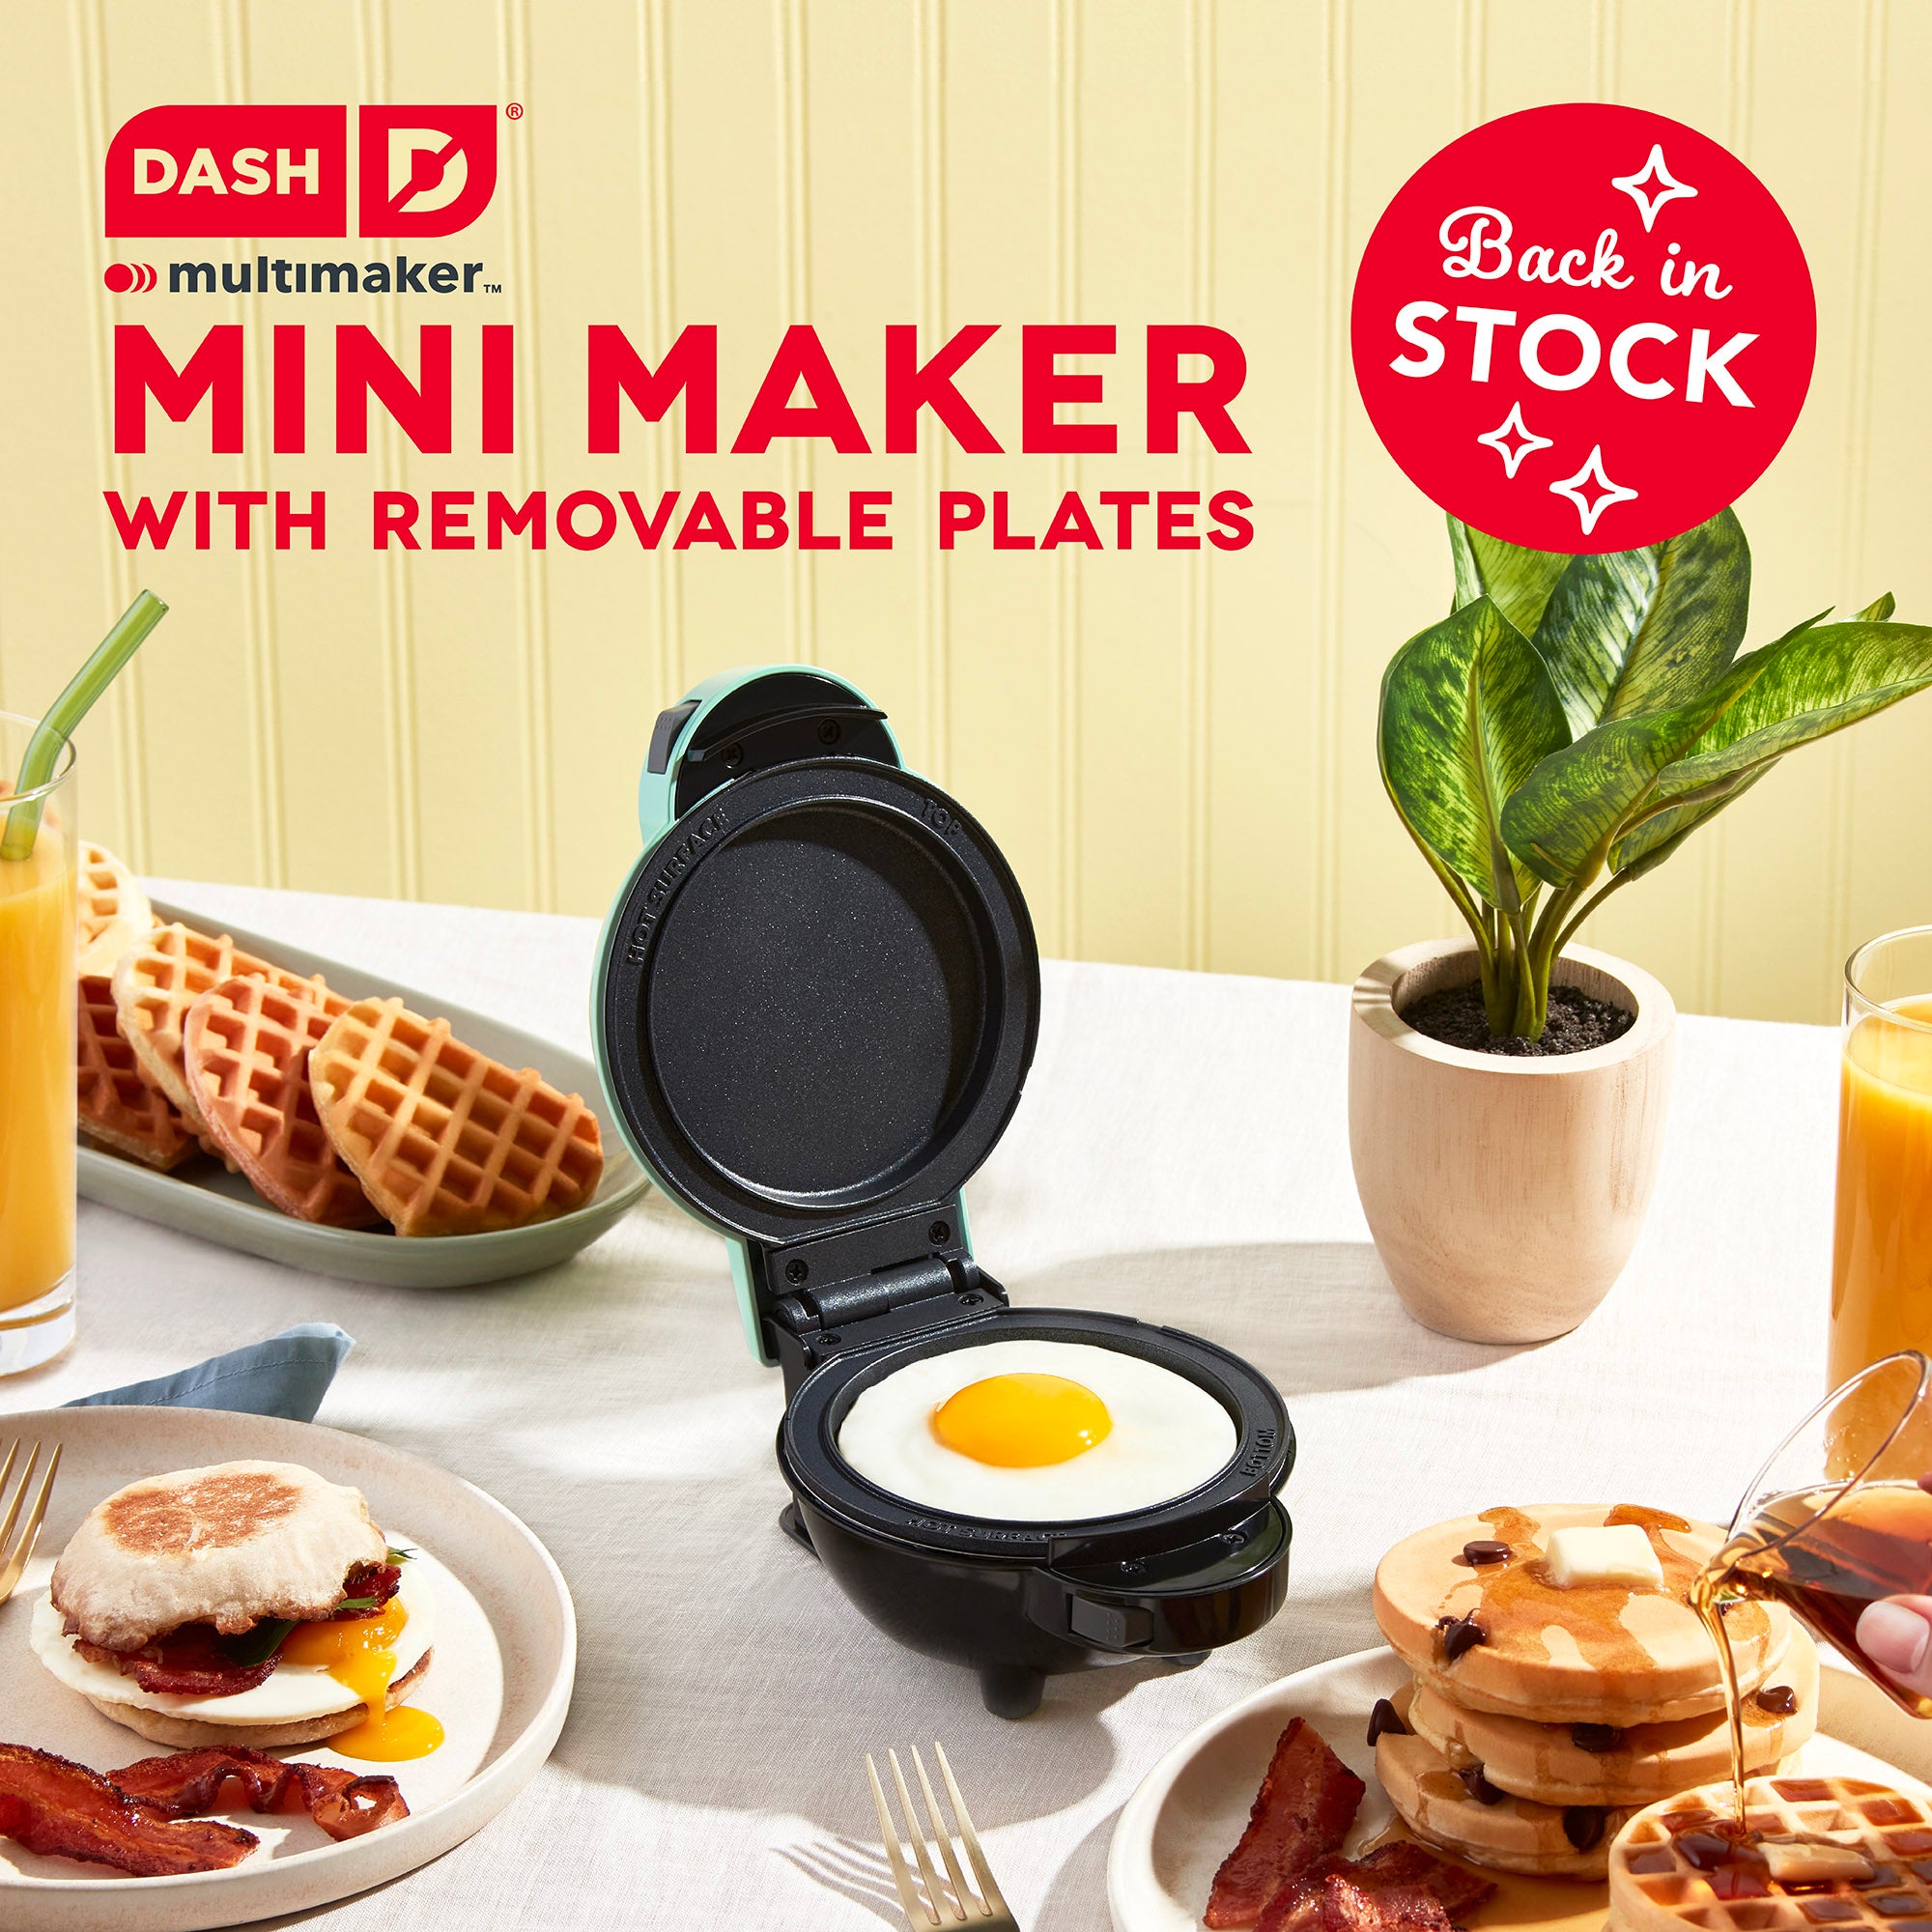 The Dash MultiMaker Mini Maker with Removable Plates is back in stock!